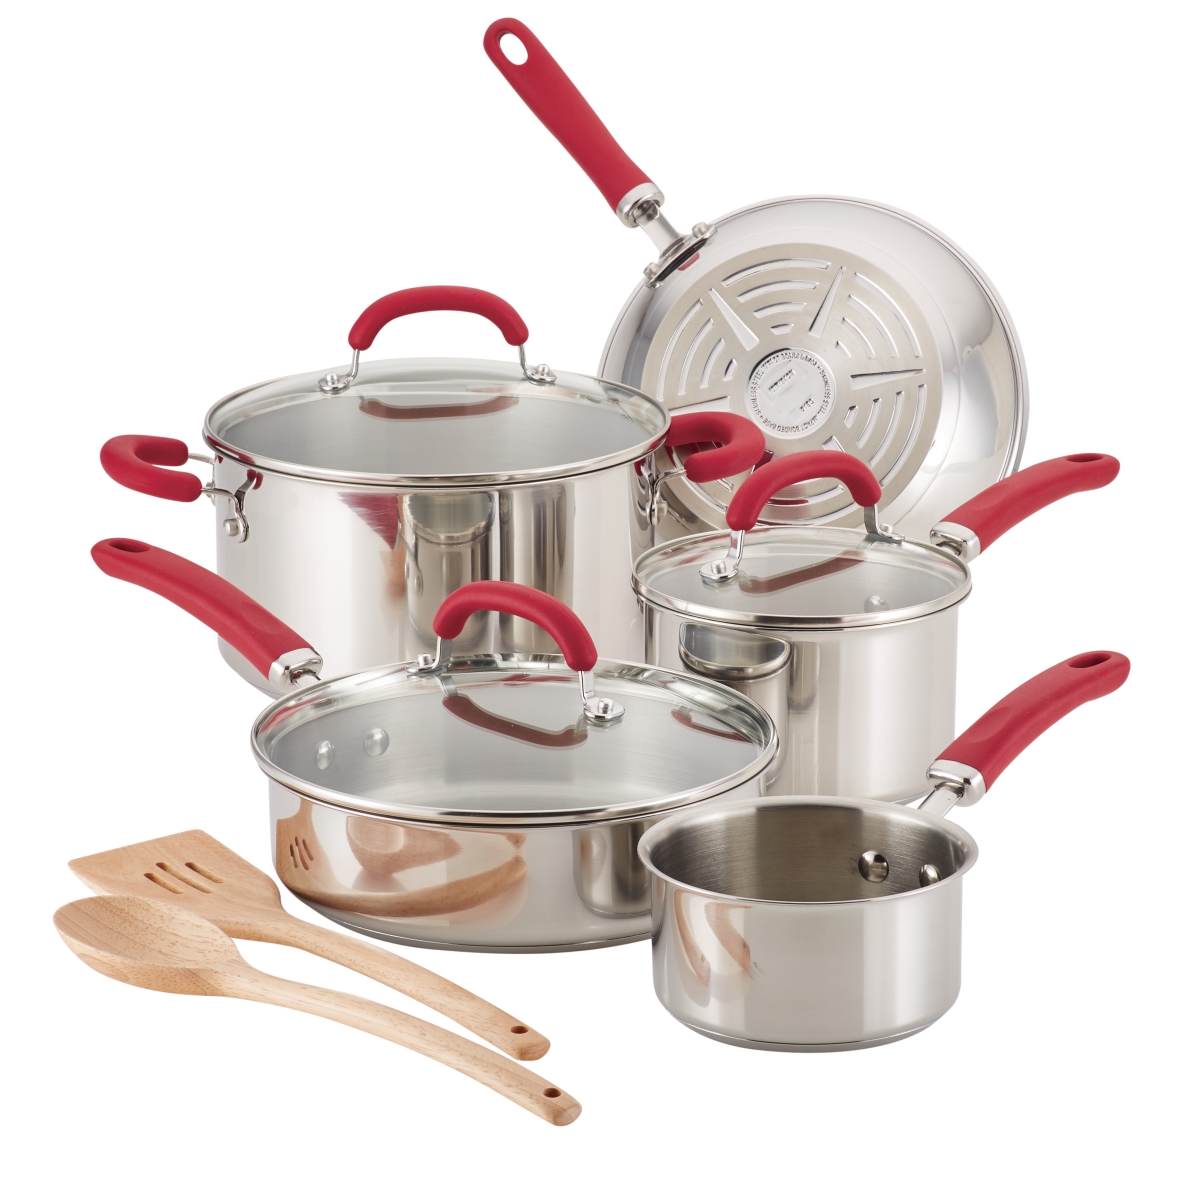 Rachael Ray 70413 Create Delicious Stainless Steel Cookware Set, 10 Piece - Red Handles